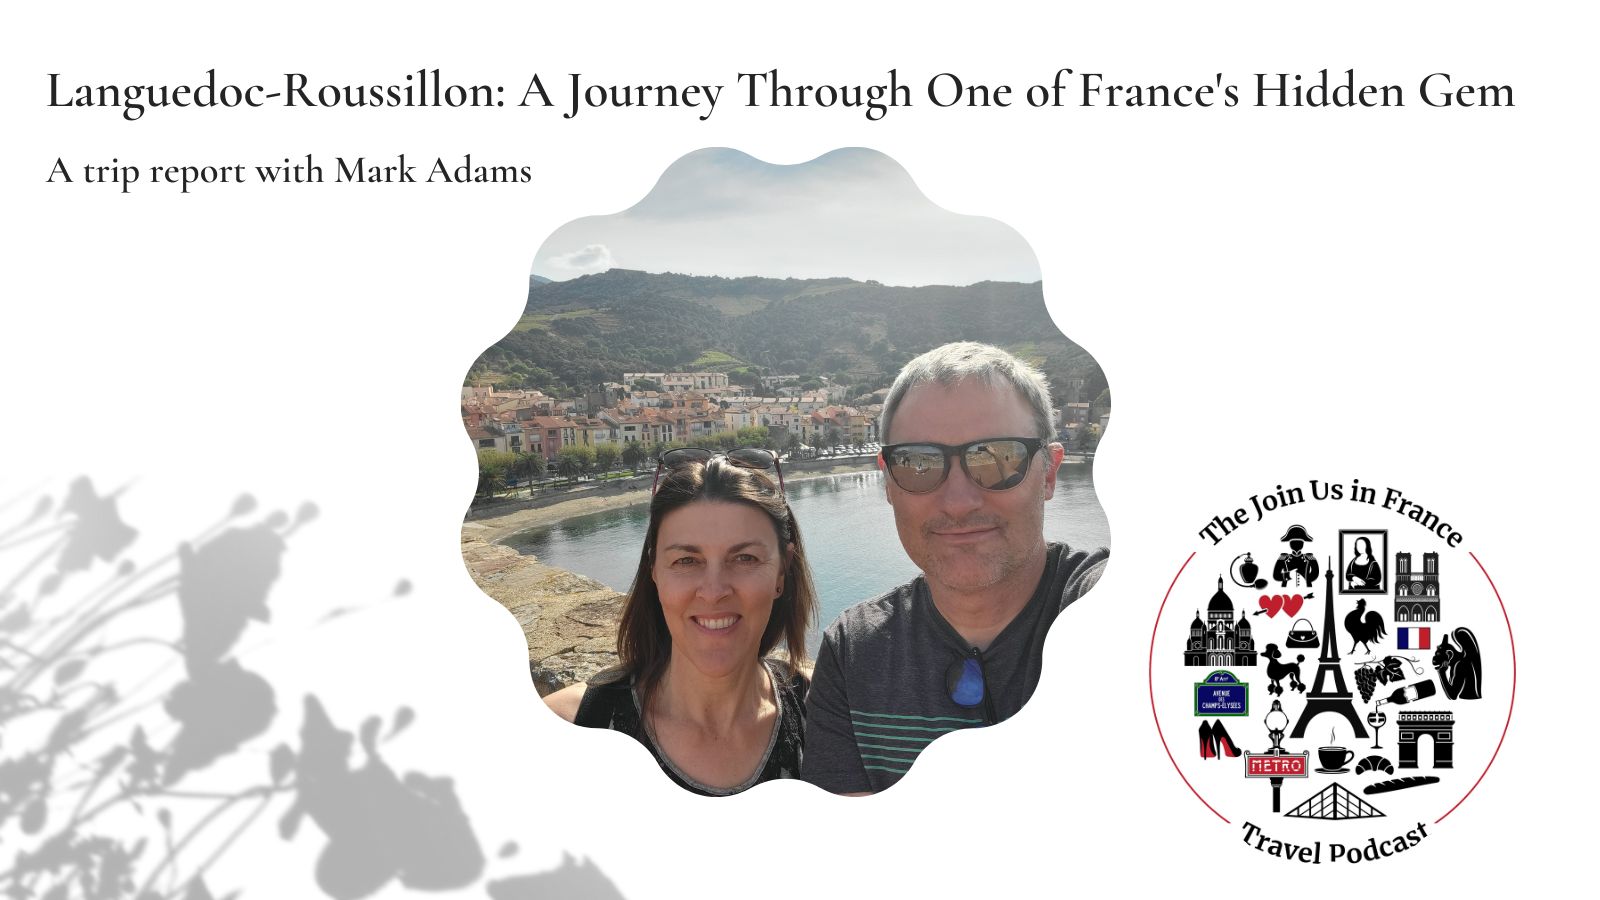 Mark and his wife photo taken in the Languedoc-Roussillon